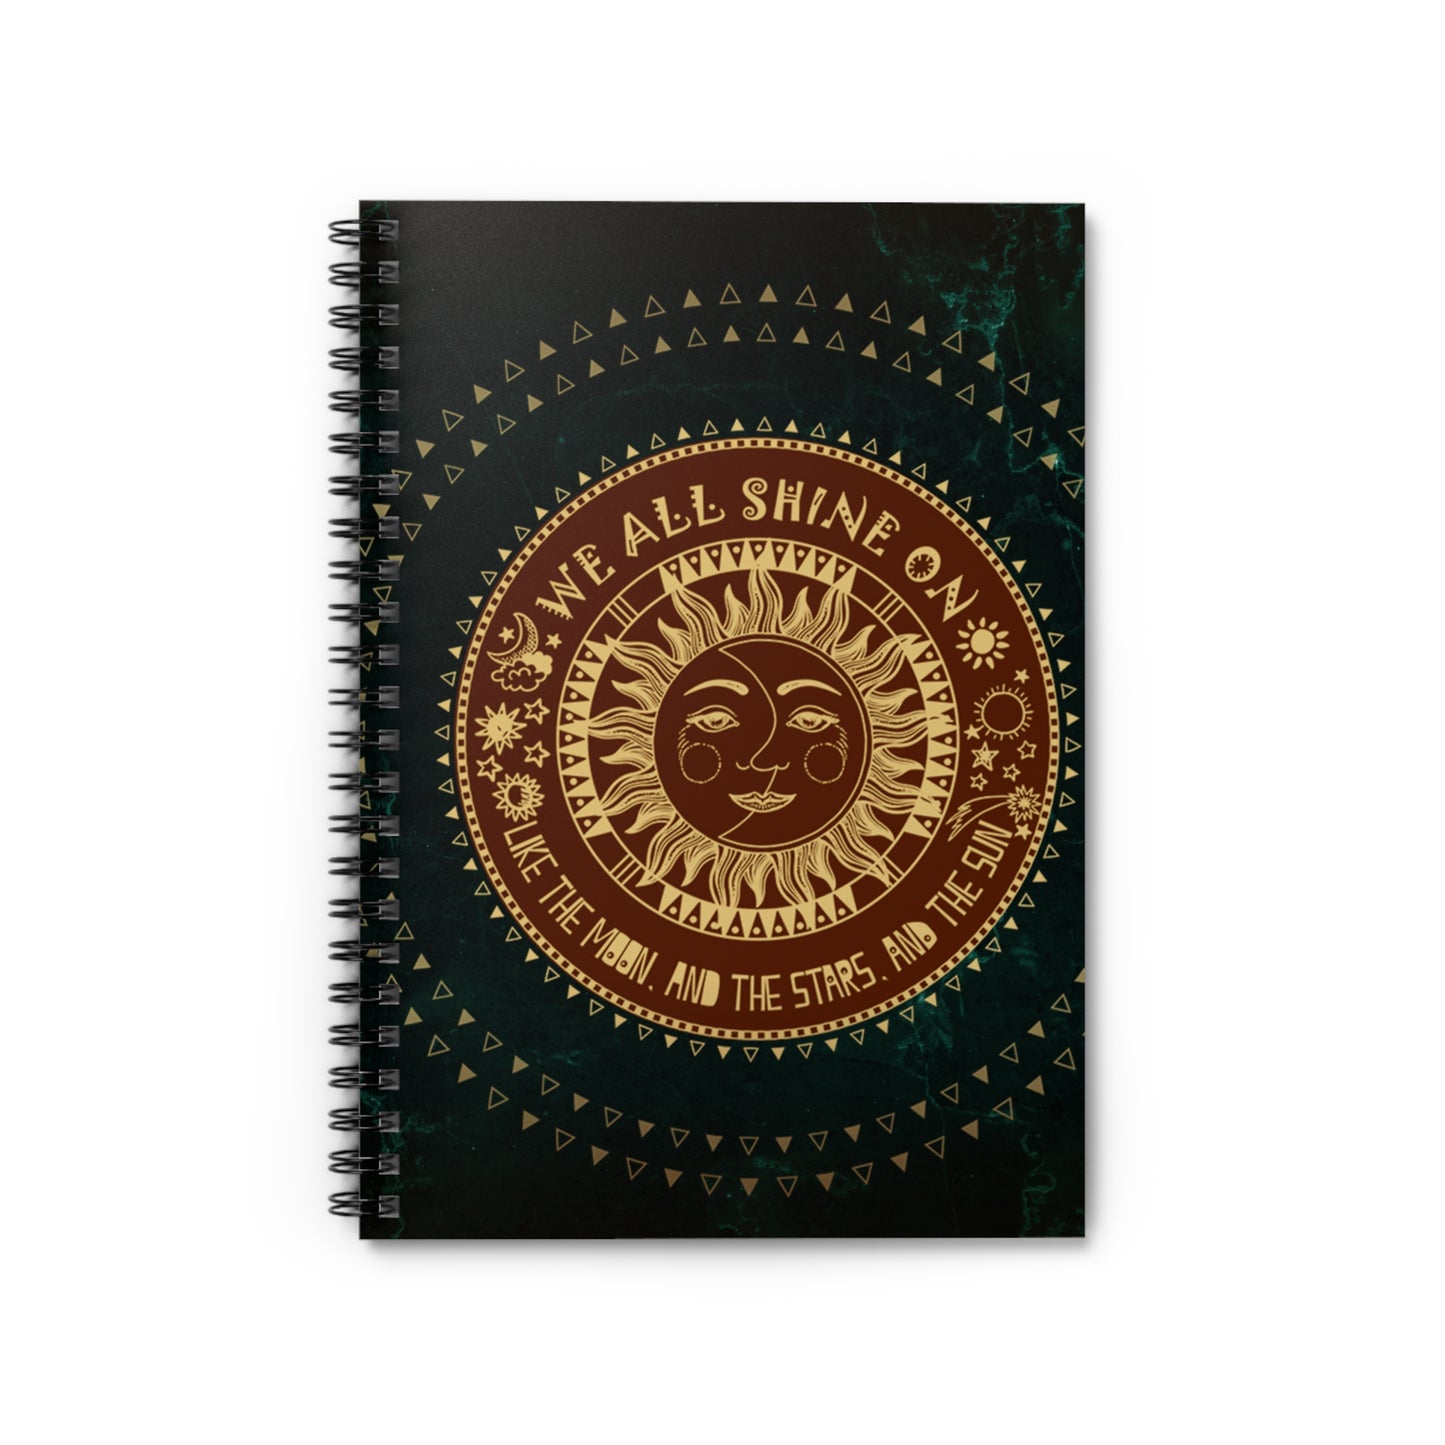 We All Shine On - Spiral Notebook - Ruled Line